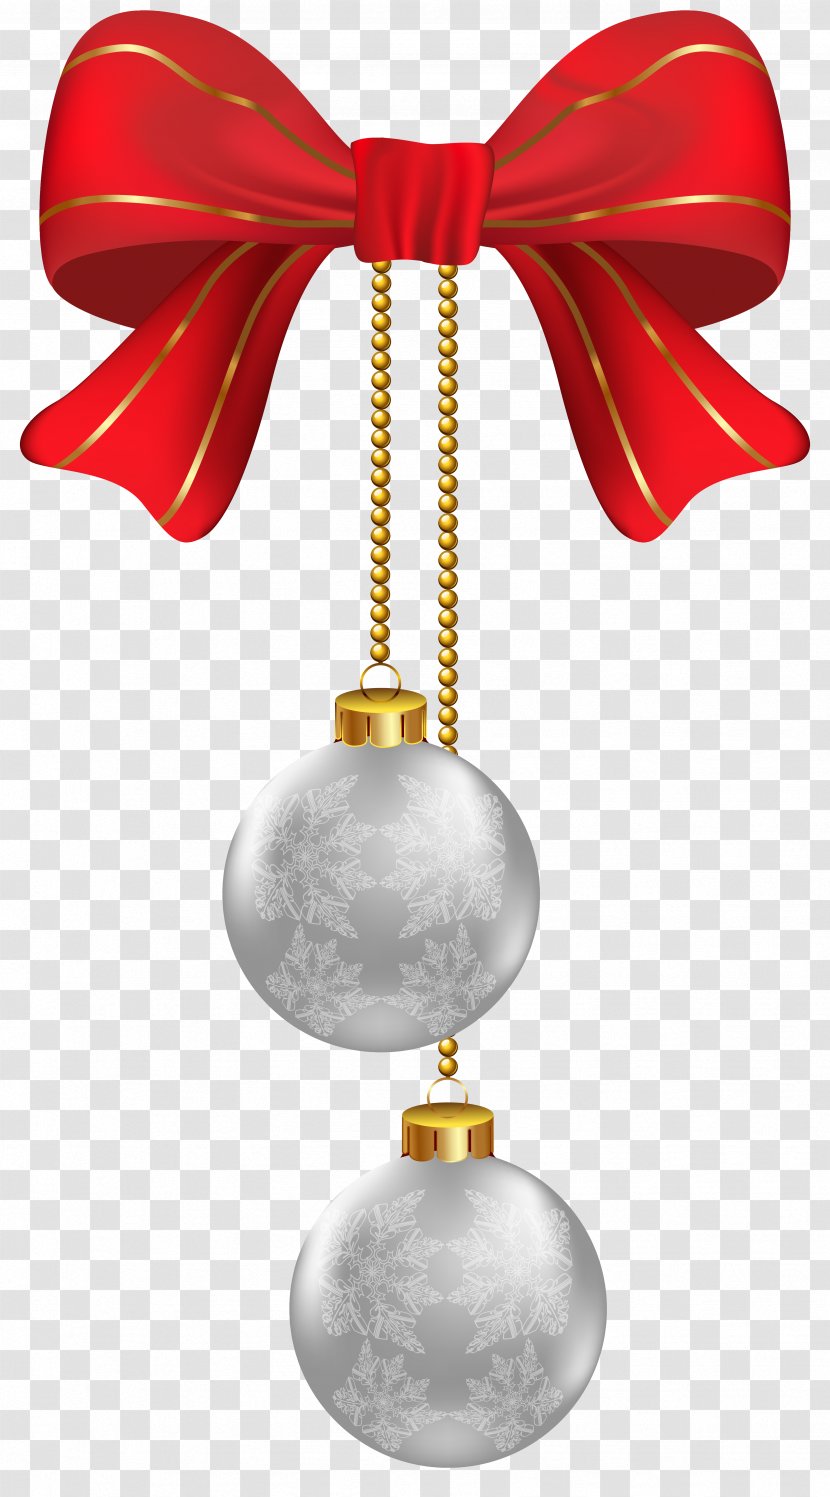 Hanging Christmas Silver Ornaments Clipart Image - Holiday Ornament Transparent PNG